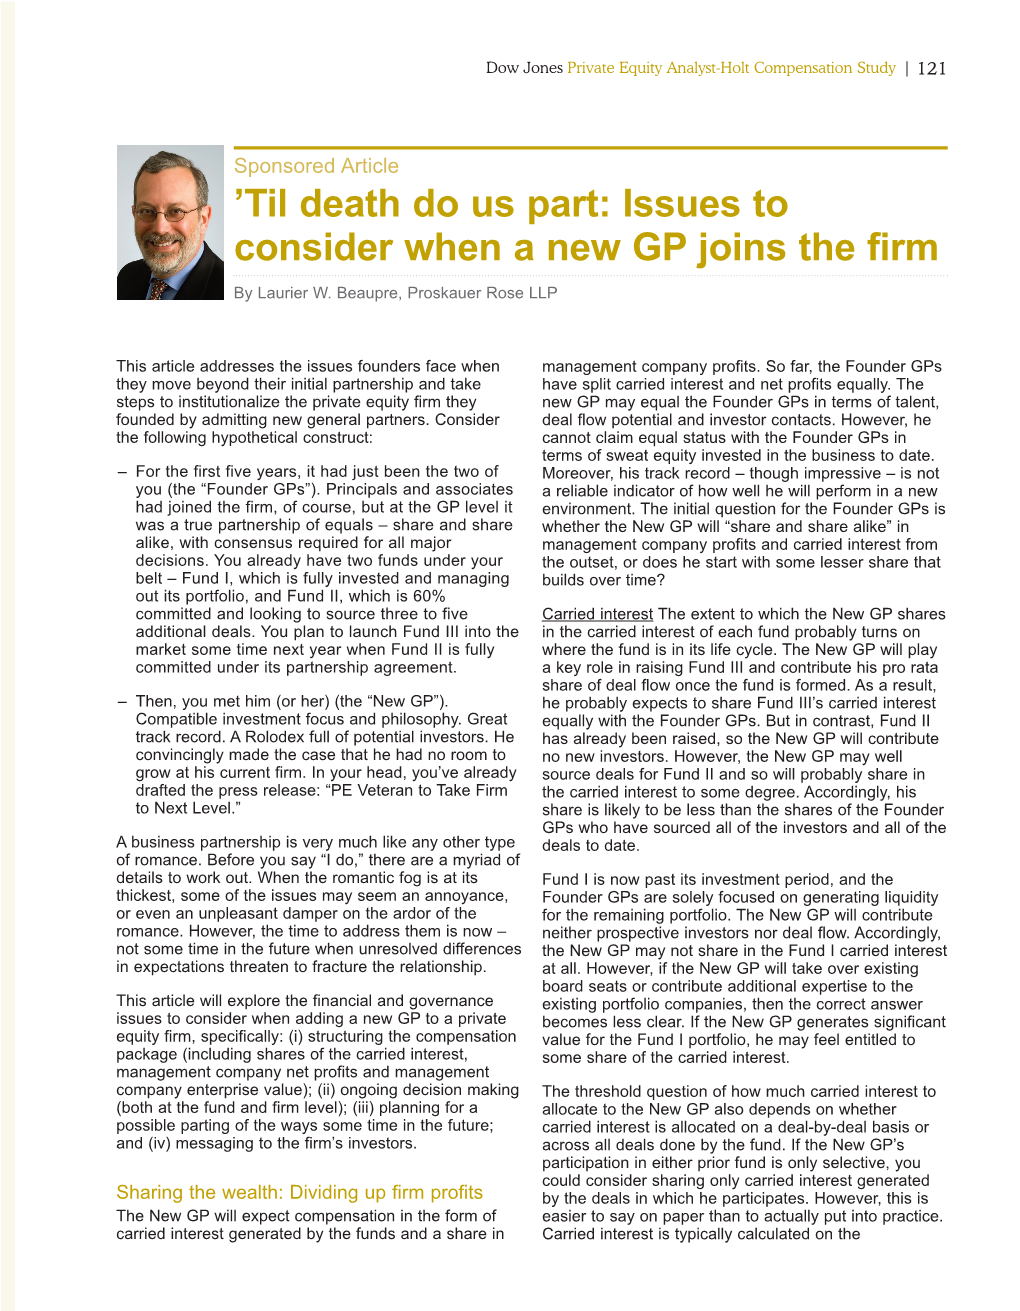 'Til Death Do Us Part: Issues to Consider When a New GP Joins The